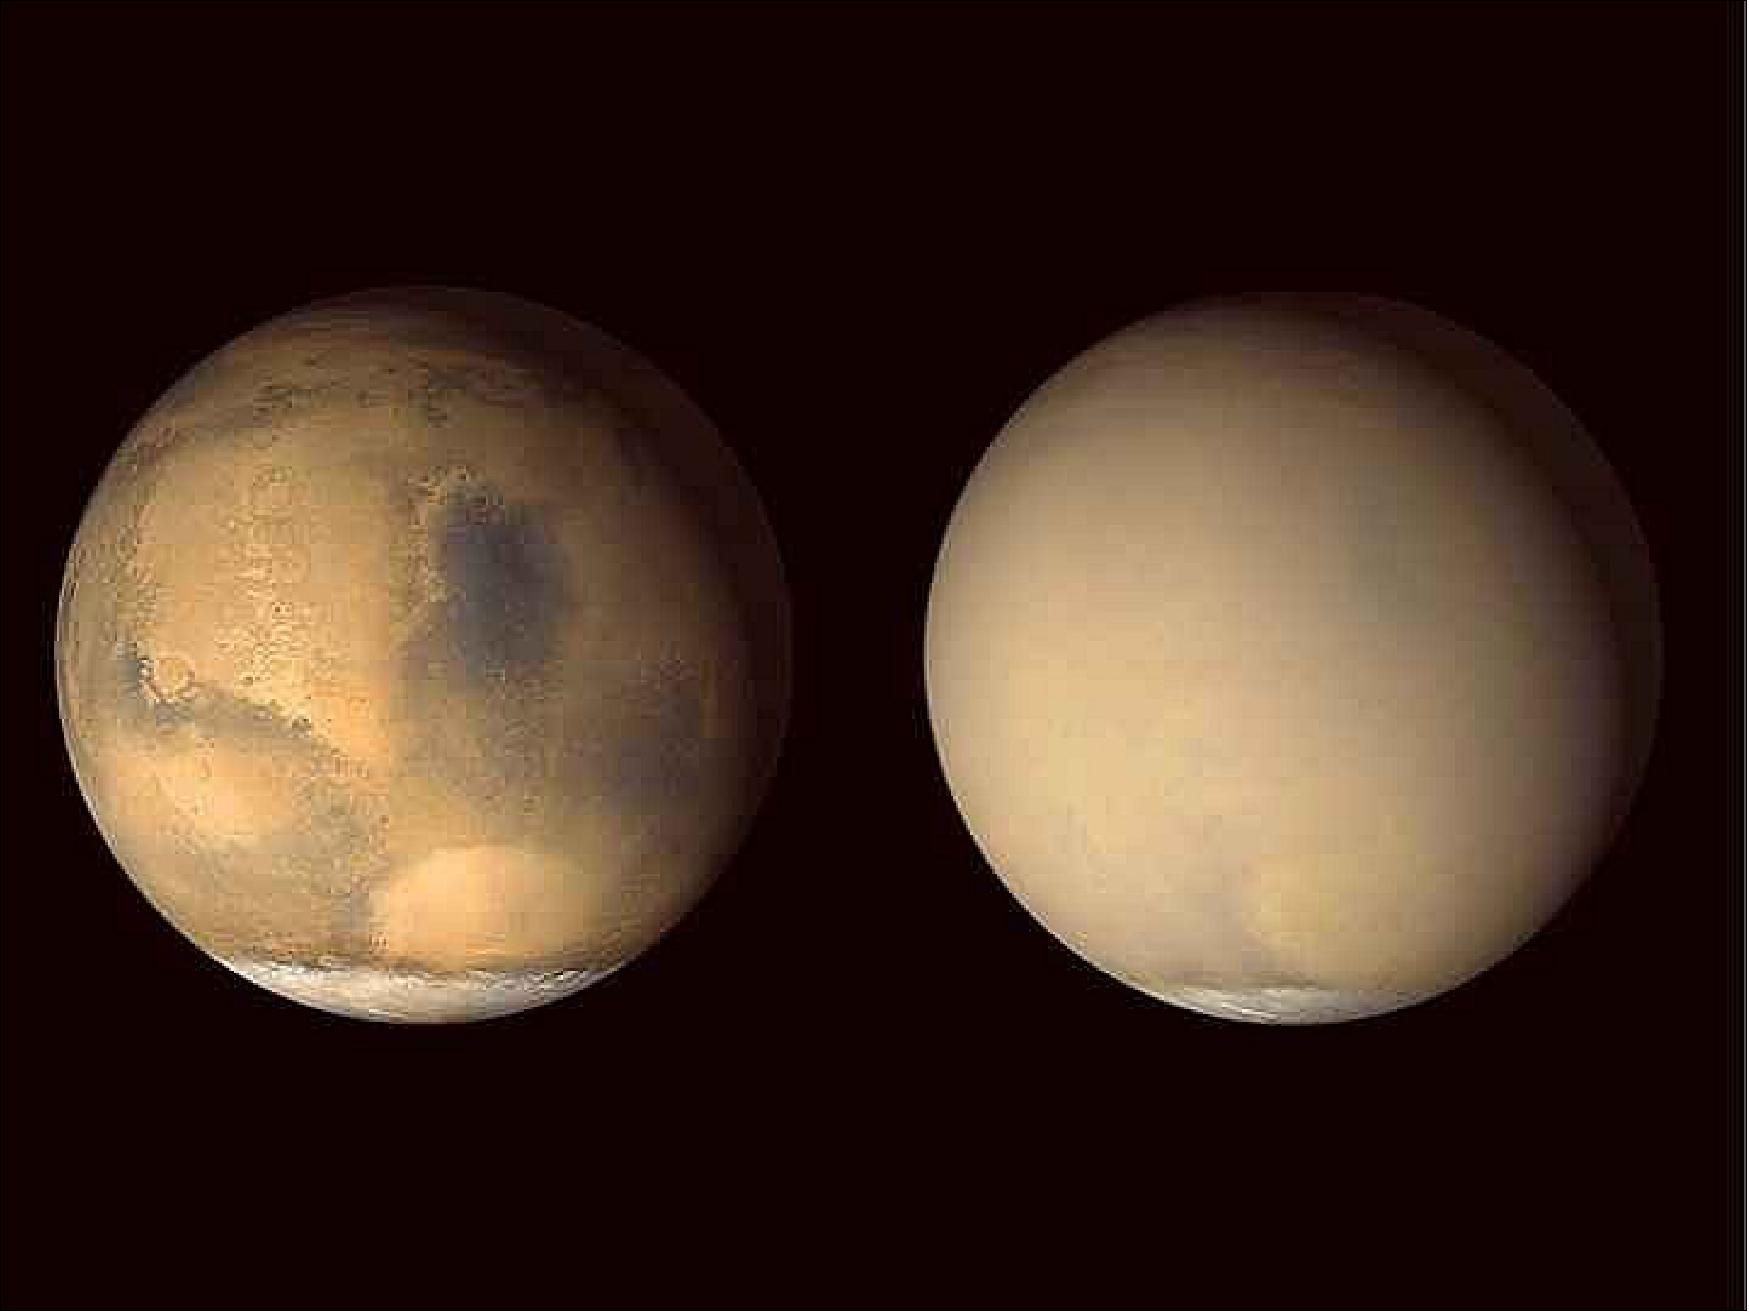 Figure 1: UH researchers found a link between Mars’ dust storms and its seasonal energy imbalance. Further studies could grant insight into how ancient climate change affected the Red Planet, perhaps even how Earth’s future may be shaped by climate change. At left, Mars in clear conditions; at right, Mars enveloped by a seasonal dust storm (photo credit: NASA / JPL / MSSS)